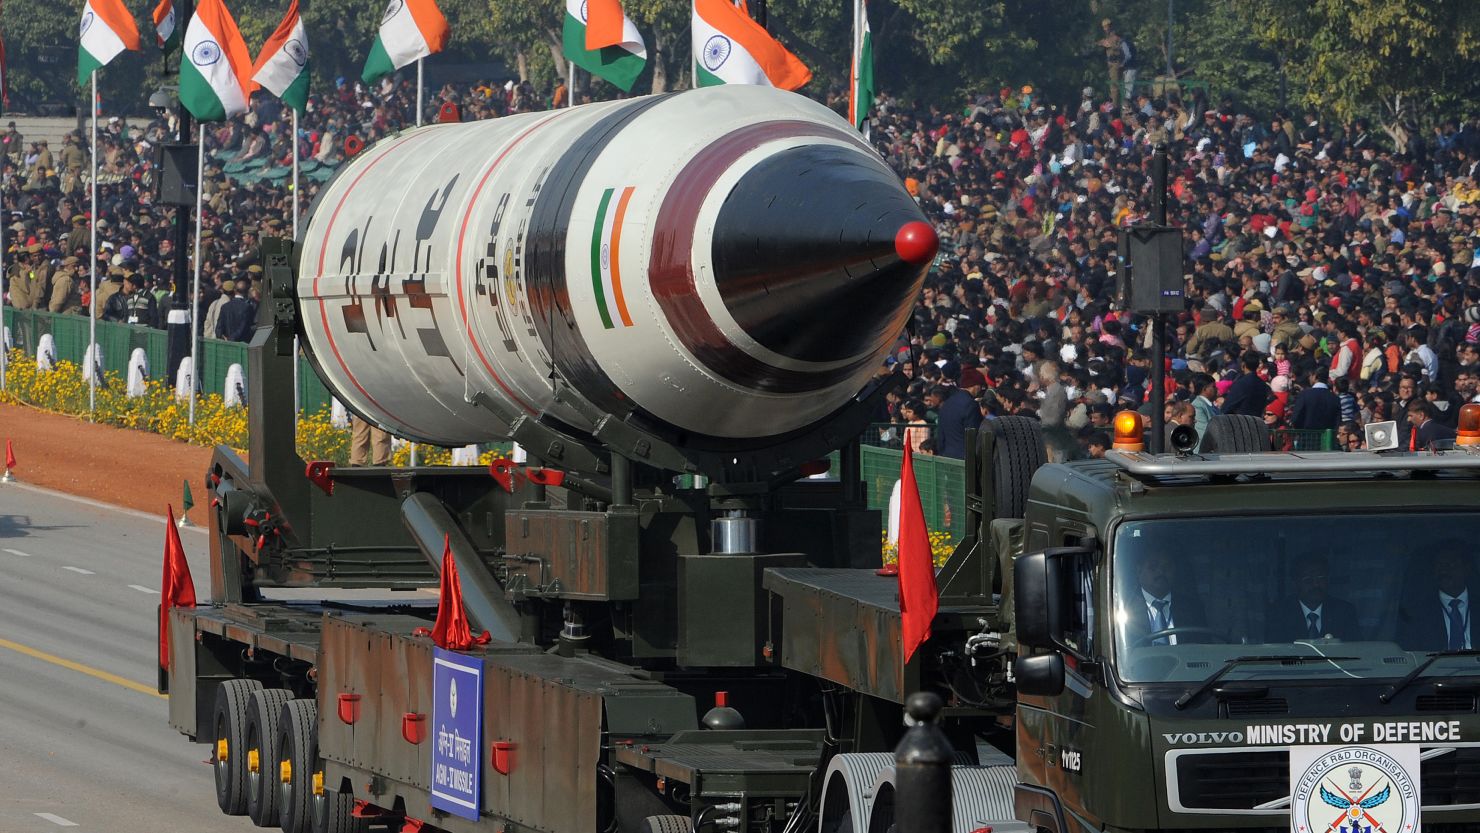 The Agni-V is displayed during the Republic Day parade in New Delhi on January 26, 2013.